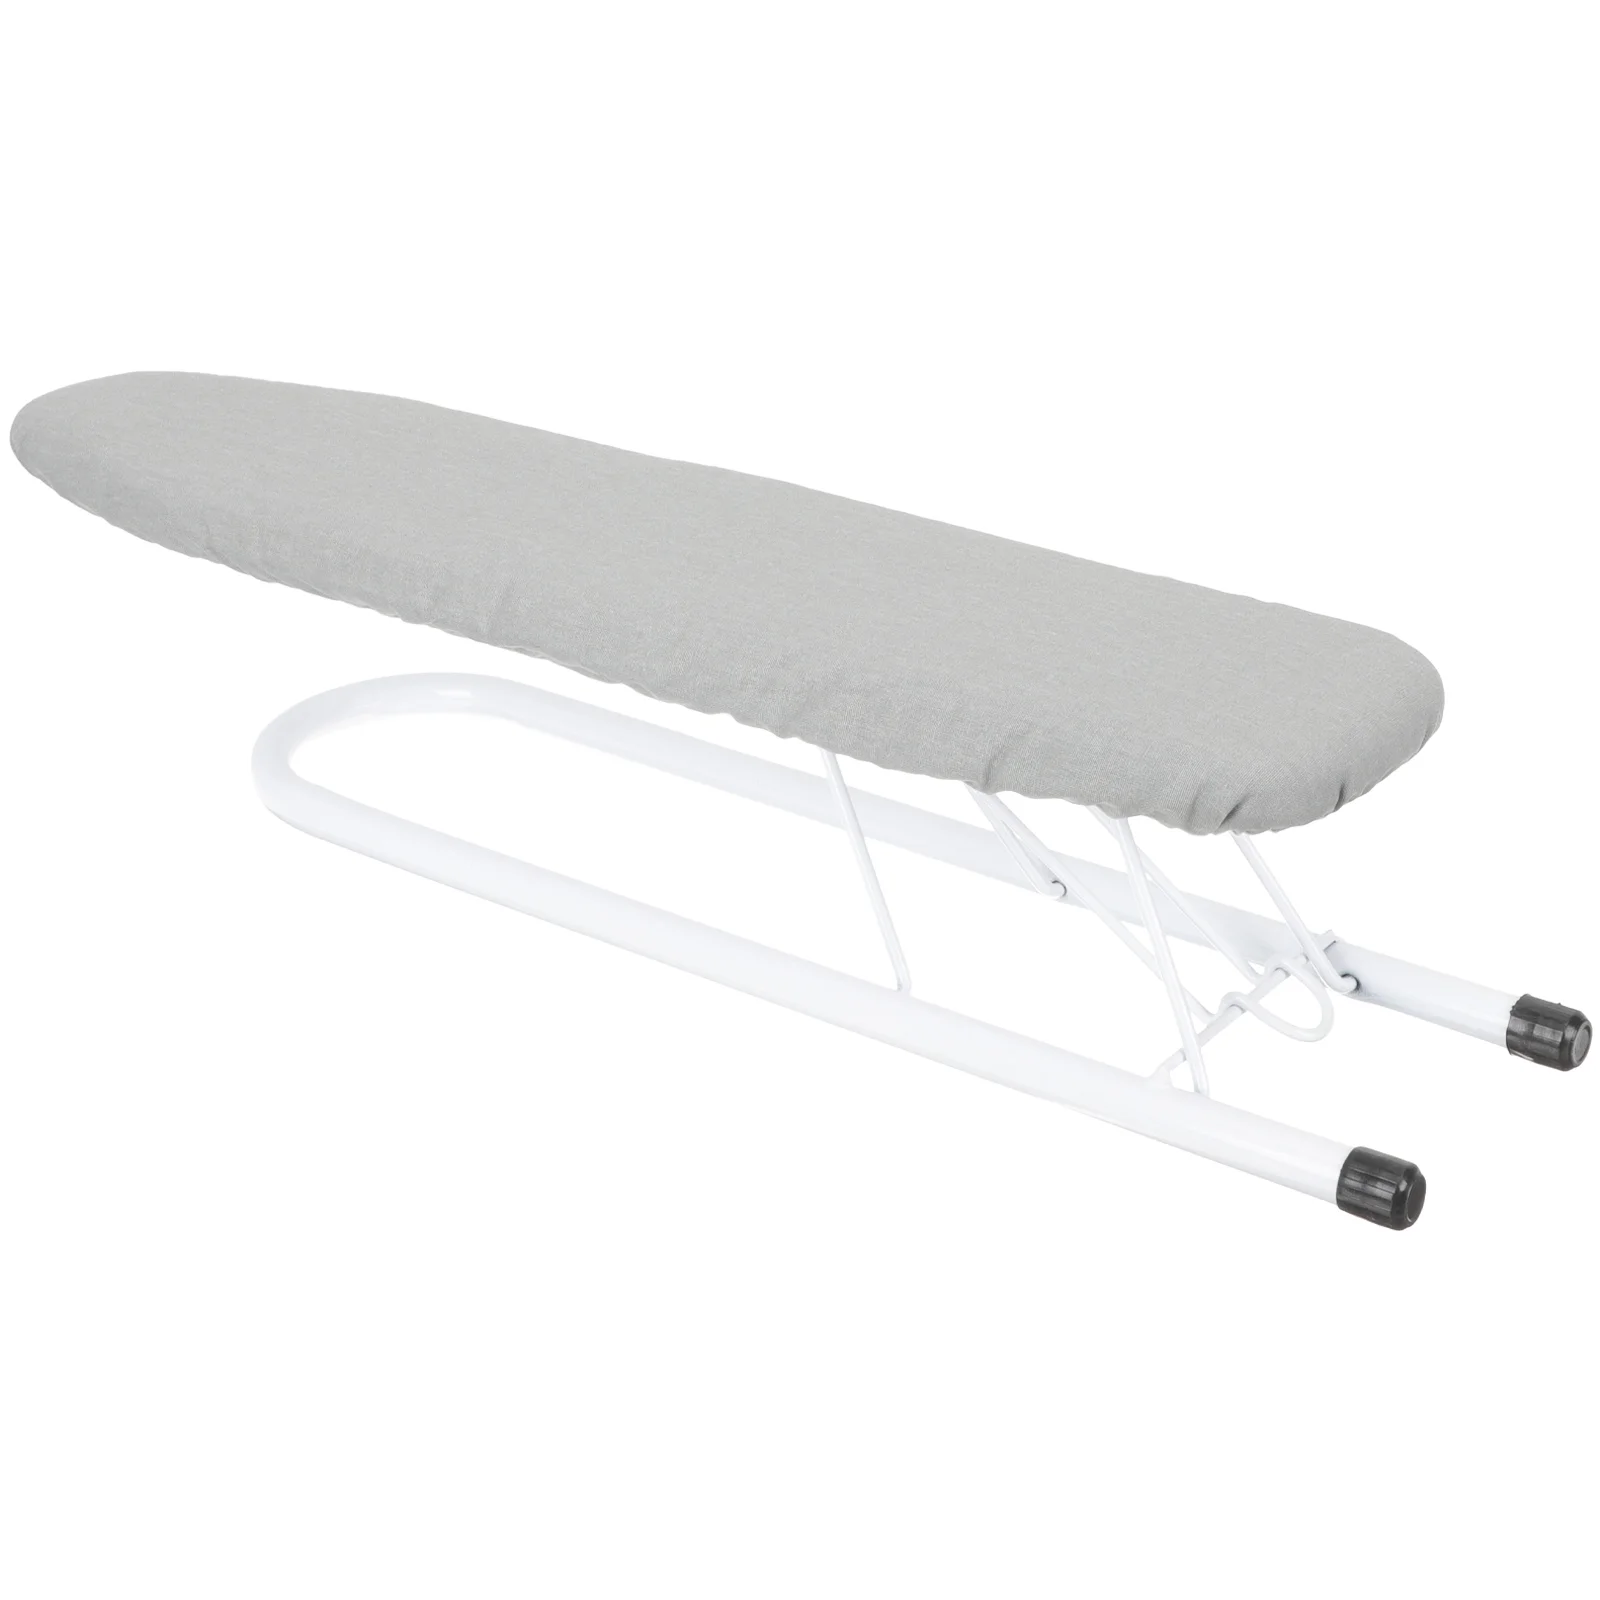 

Ironing Board Cover Pad Iron Mini Heat Resistant Tabletop Boards Foldable Resists Staining Scorching Resist Cotton Padding Felt